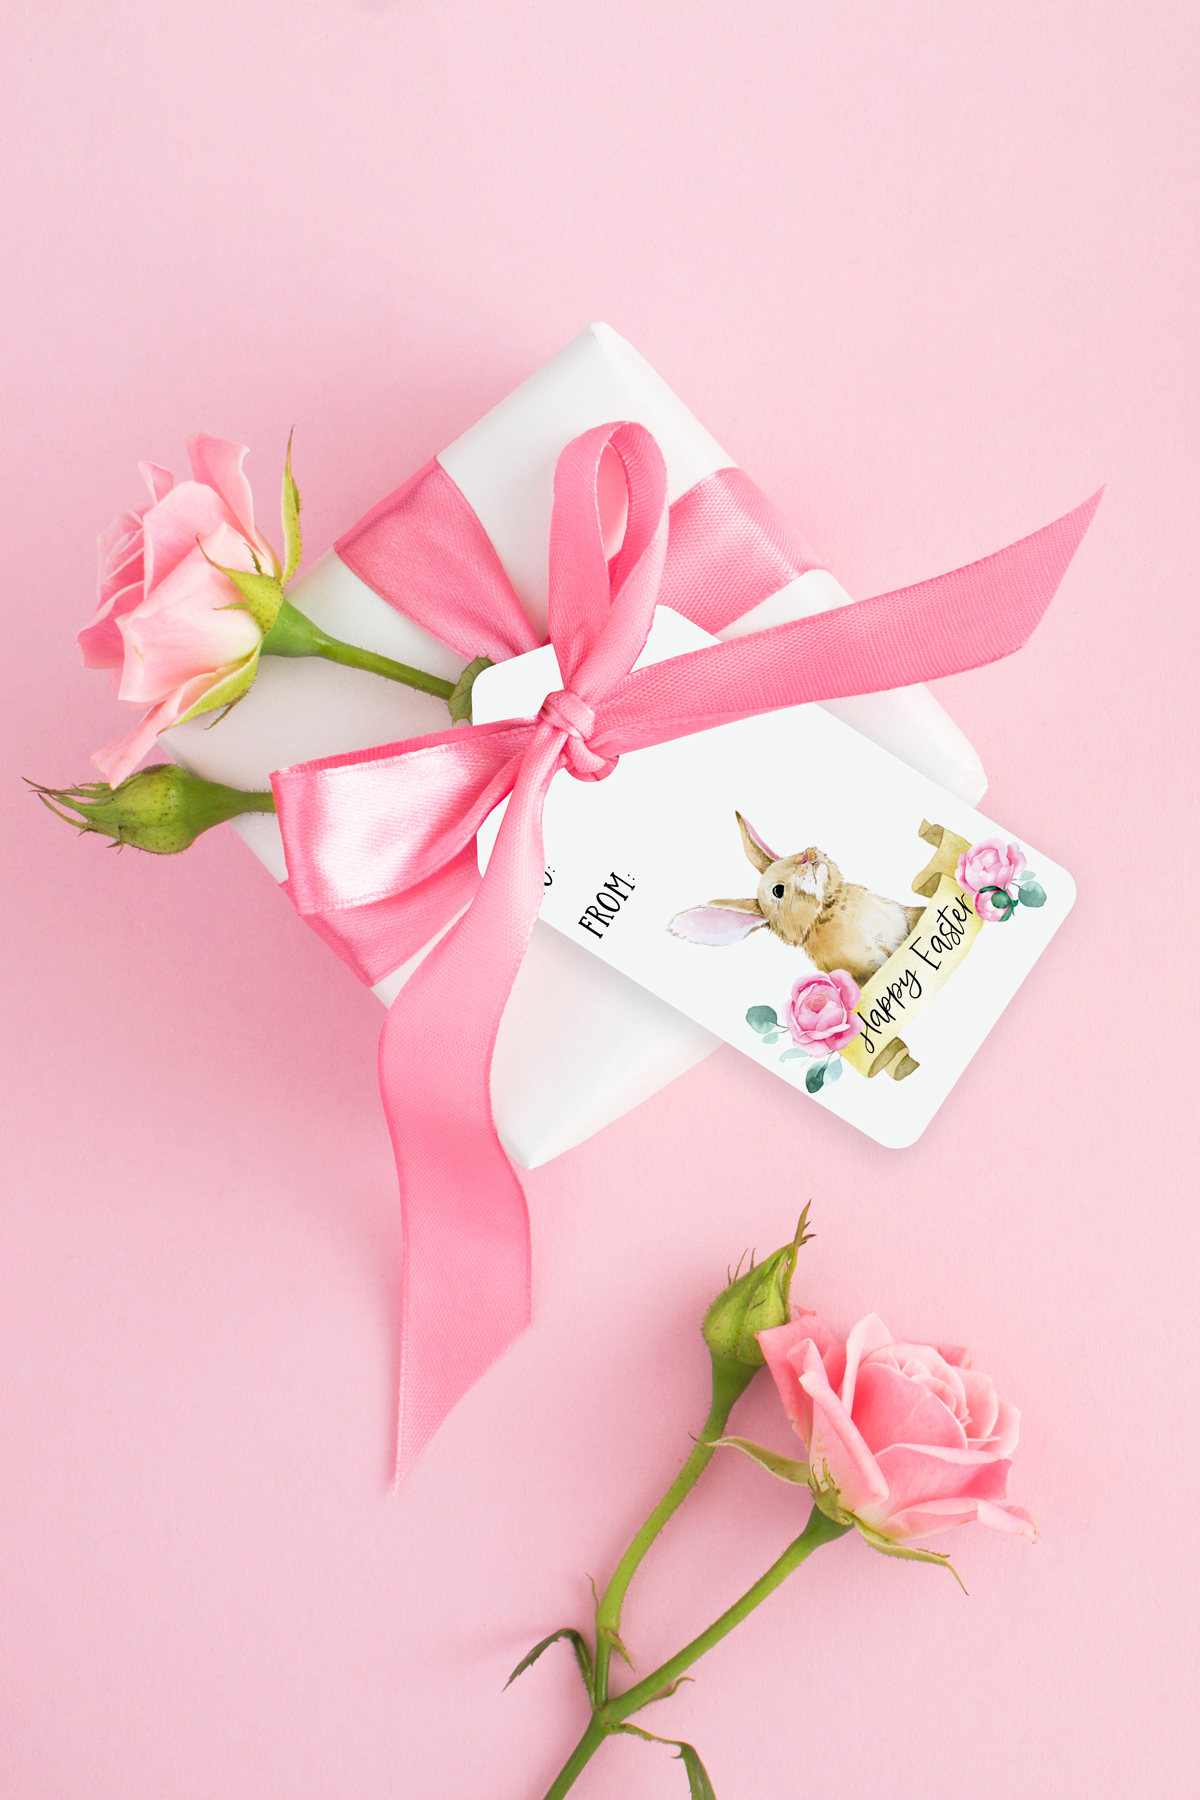 One of the free pretty Easter gift tags is attached to a wrapped gift with a large pink bow and pink carnation sticking out of it. There is an additional pink carnation at the bottom of the image.